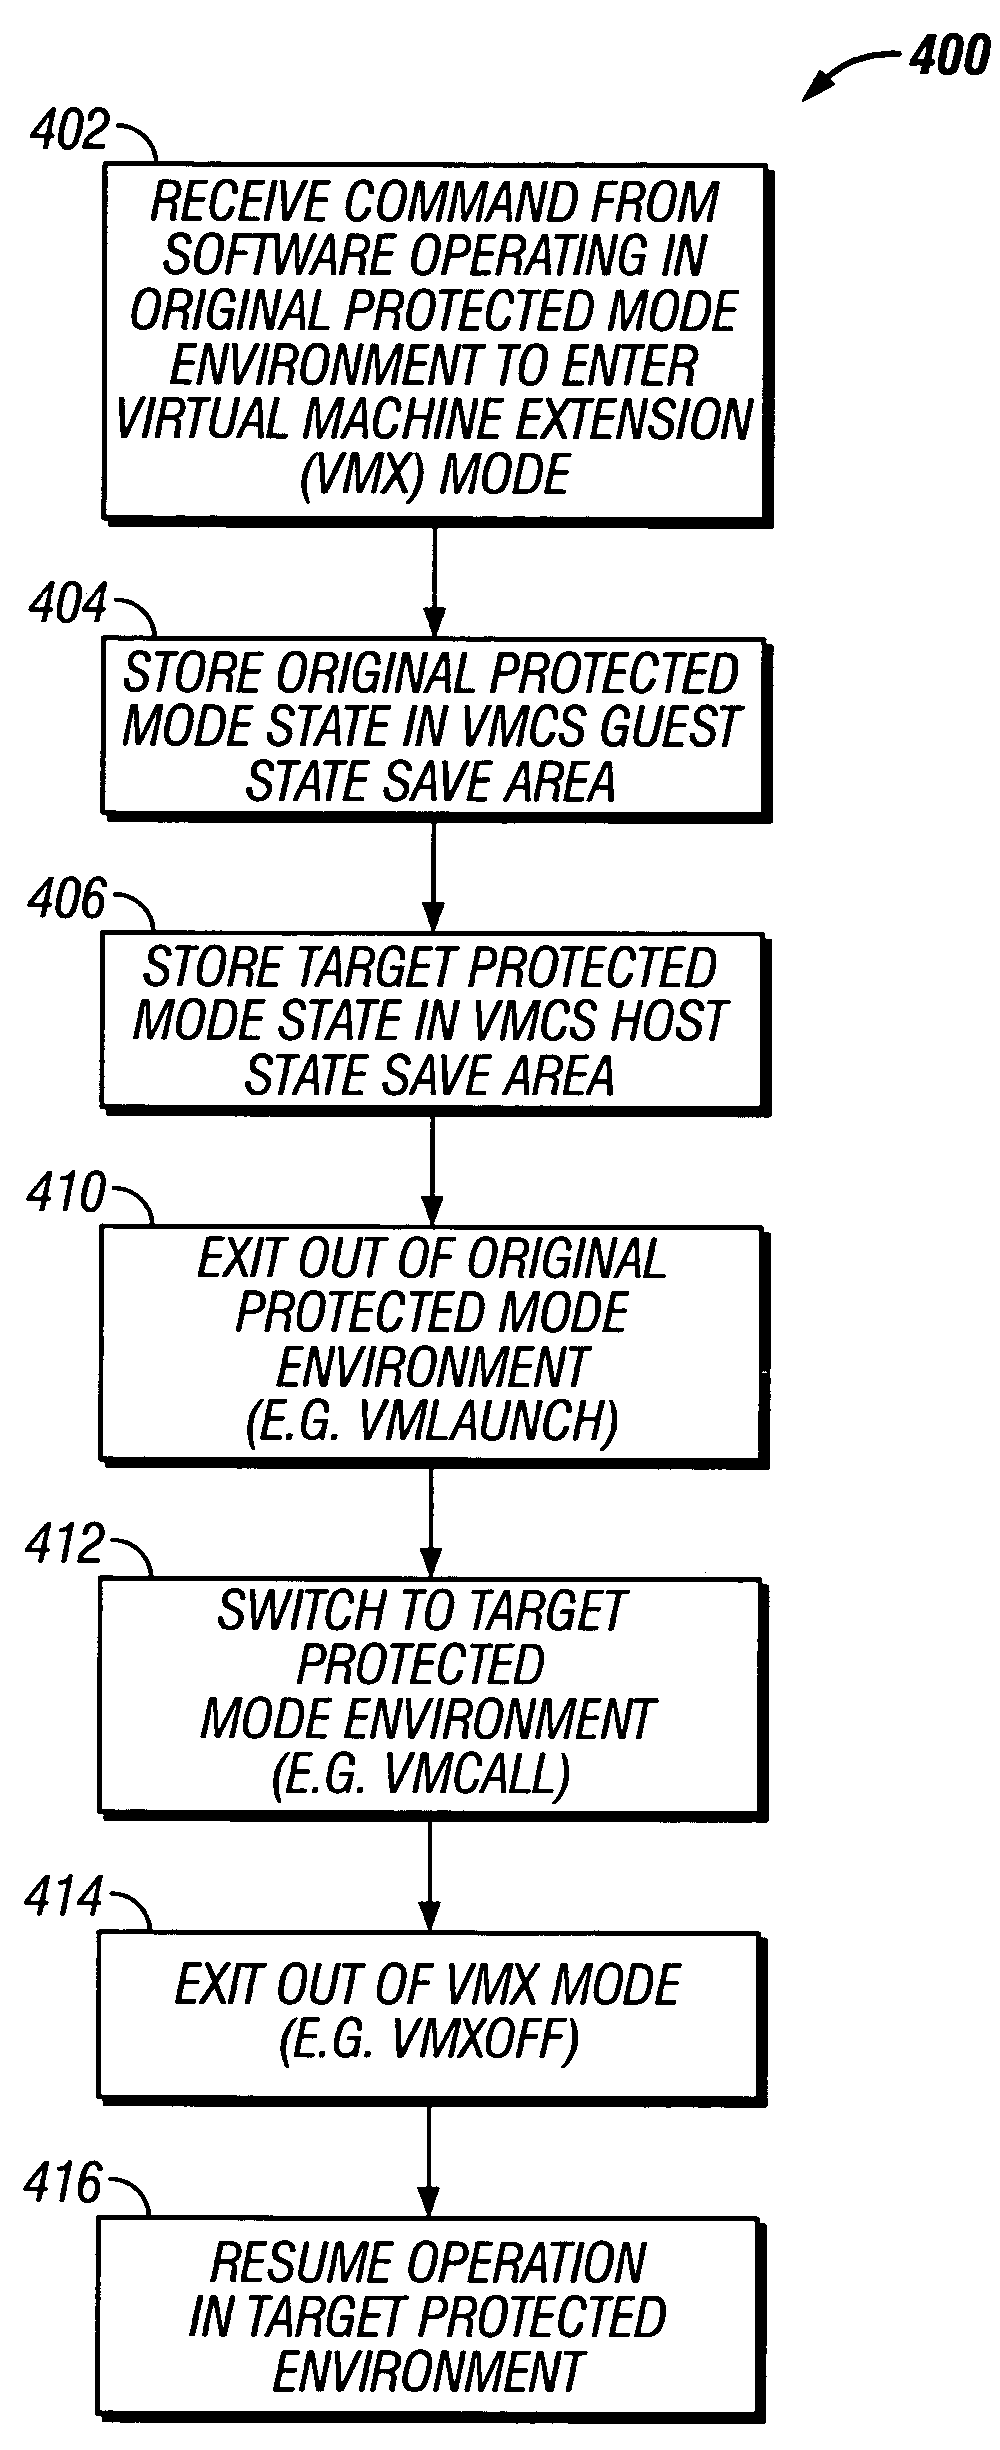 Switching between protected mode environments utilizing virtual machine functionality